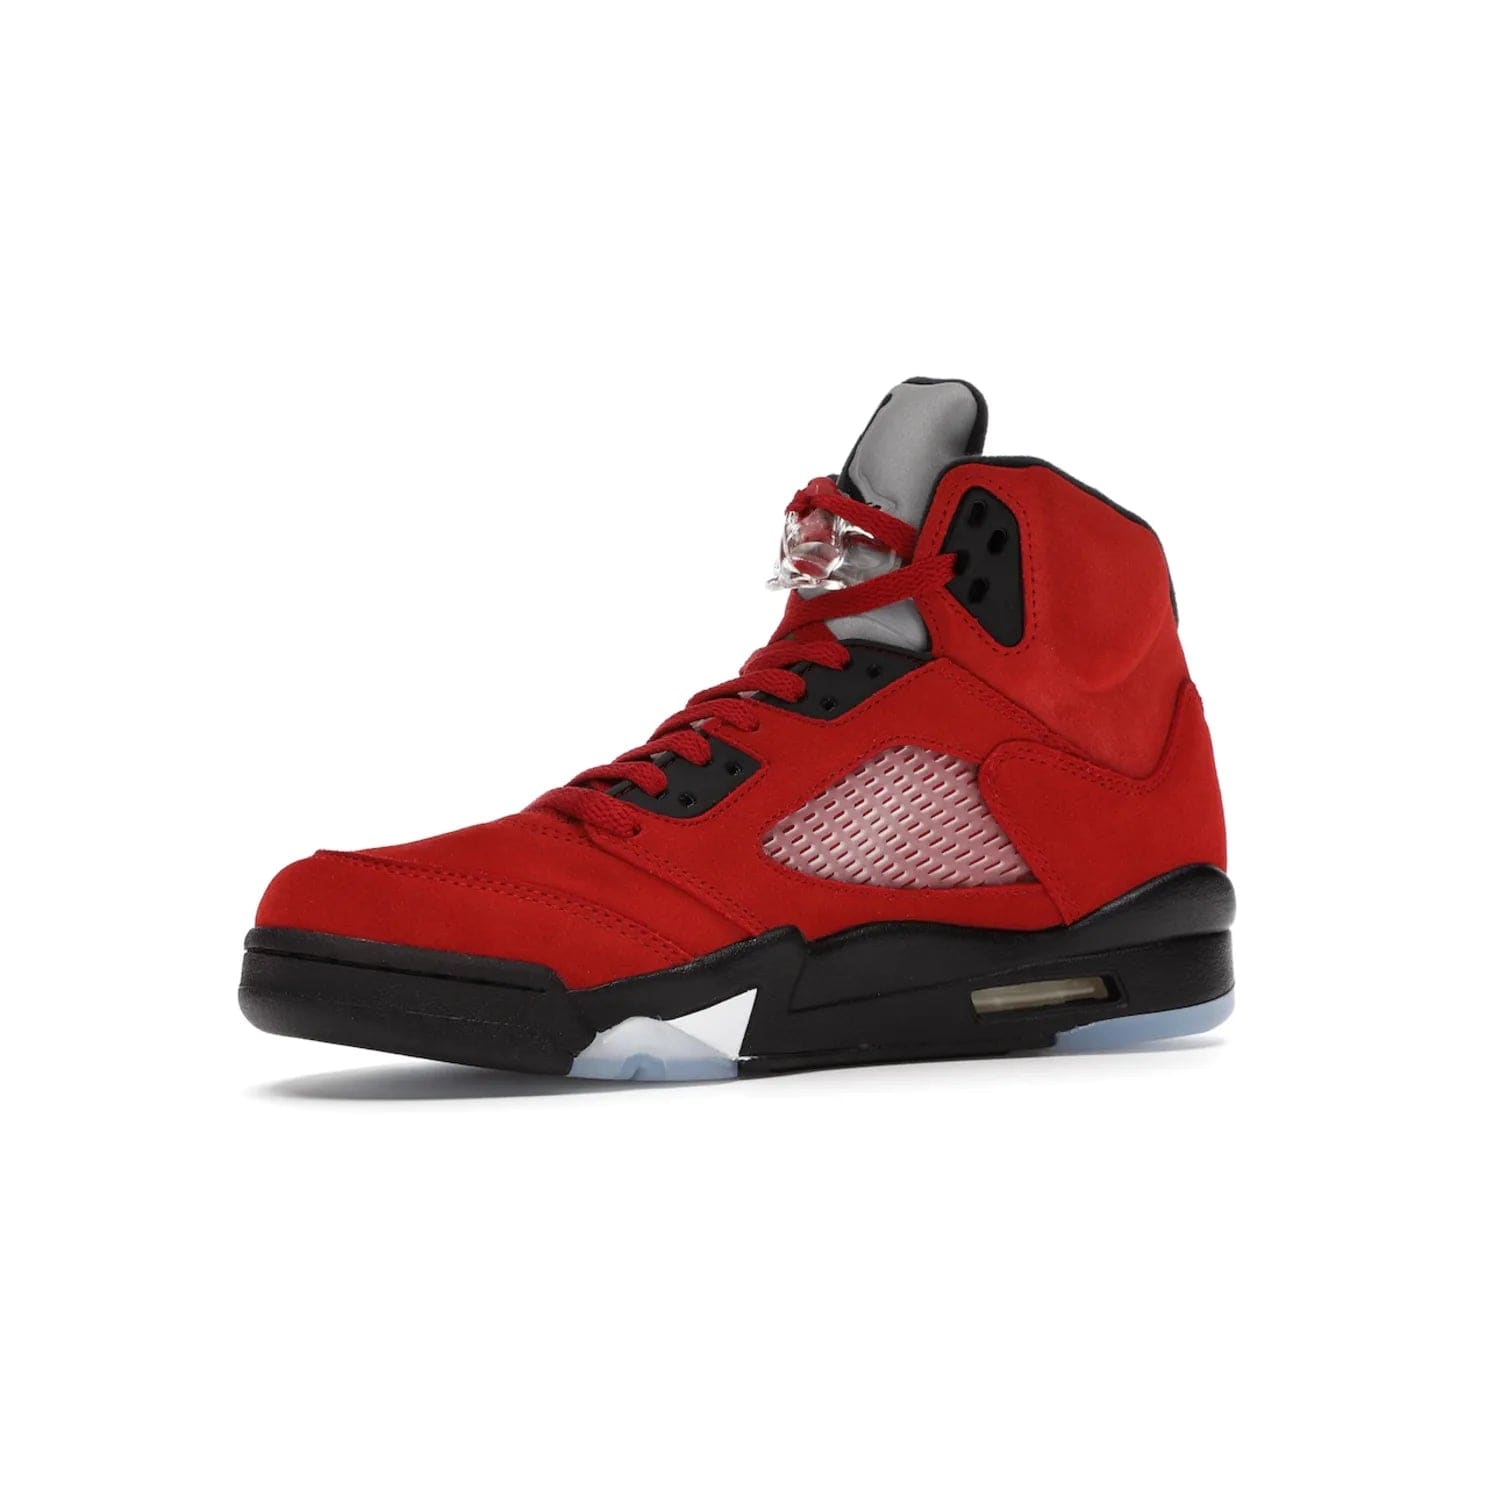 Jordan 5 Retro Raging Bull Red (2021) - Image 16 - Only at www.BallersClubKickz.com - Get ready for the 2021 stand-alone release of the Air Jordan 5 Raging Bulls! This all-suede upper combines luxe details like a Jumpman logo, red & black "23" embroidery and shark tooth detailing, atop a black midsole. Don't miss out - release date in April 2021 for $190.